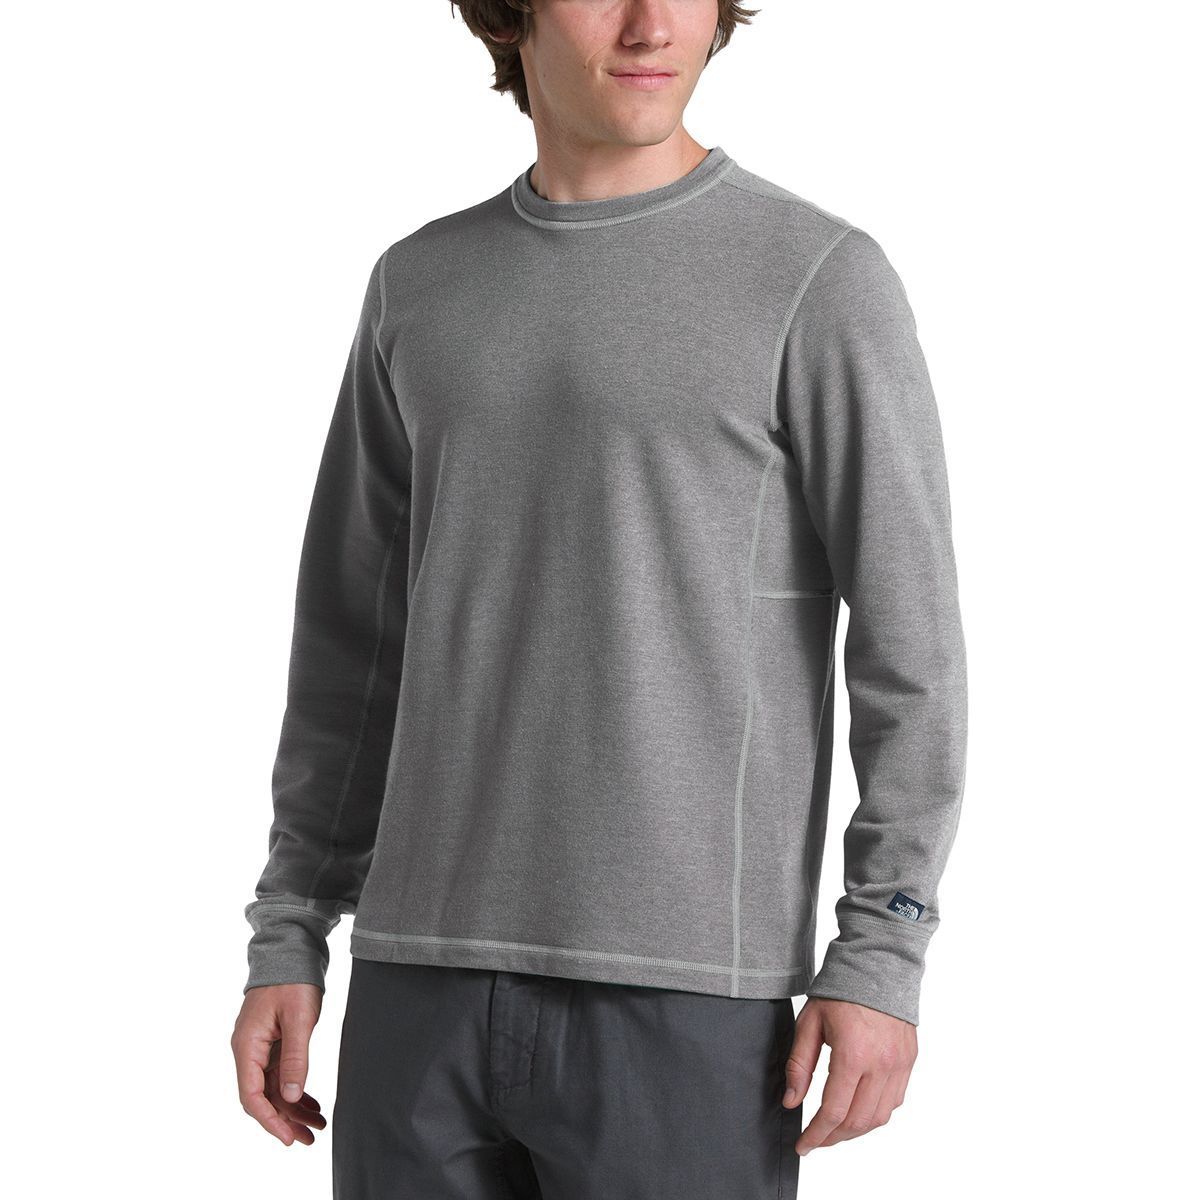 The North Face Terry Long-Sleeve Crew - Men's | Backcountry.com